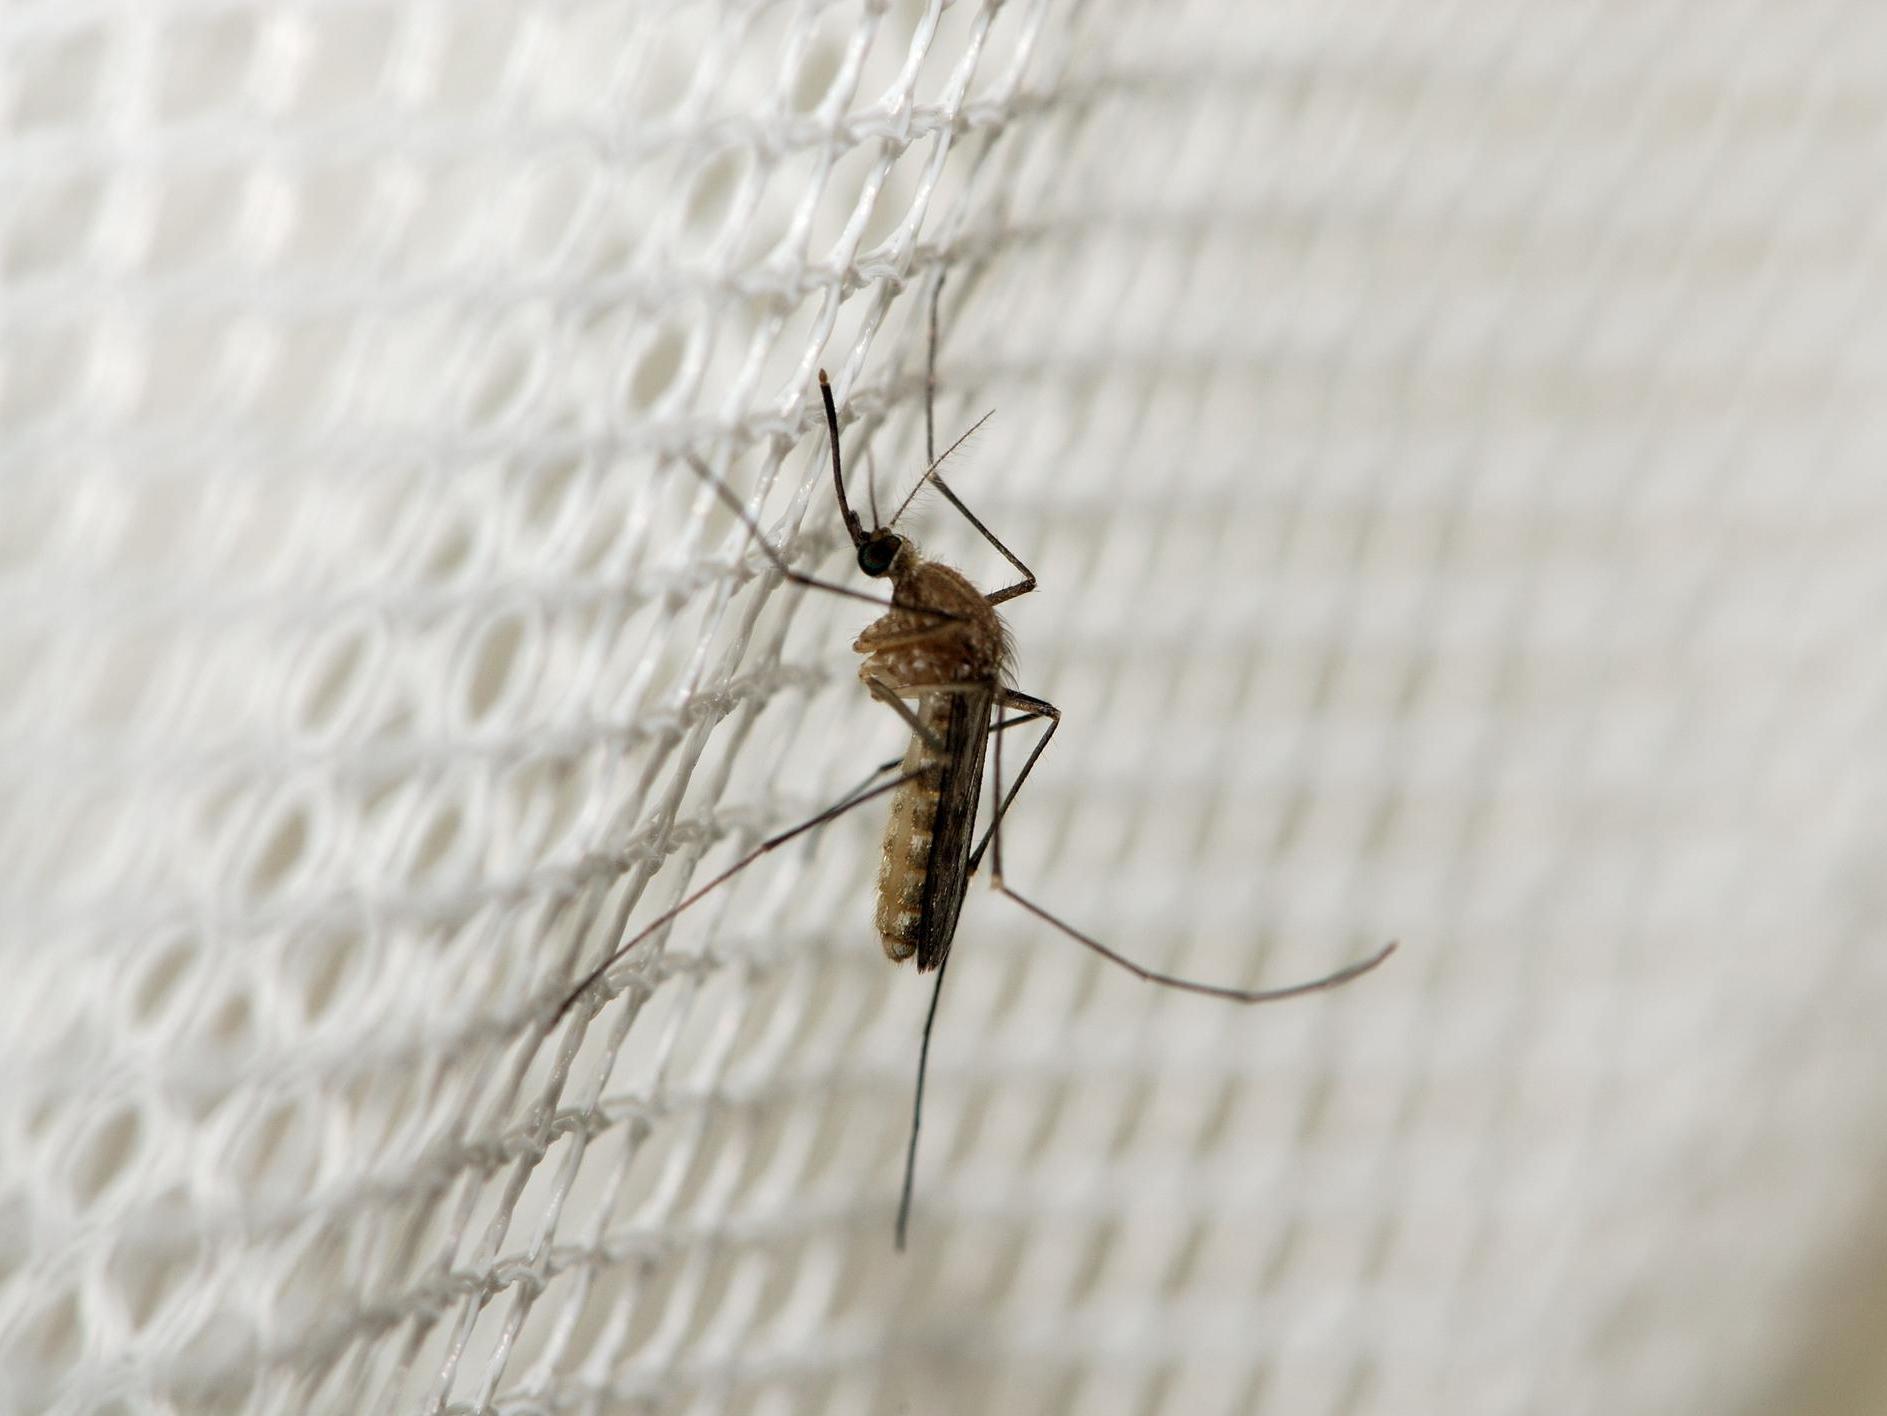 Under-fives are most at risk of dying from the mosquito-borne disease